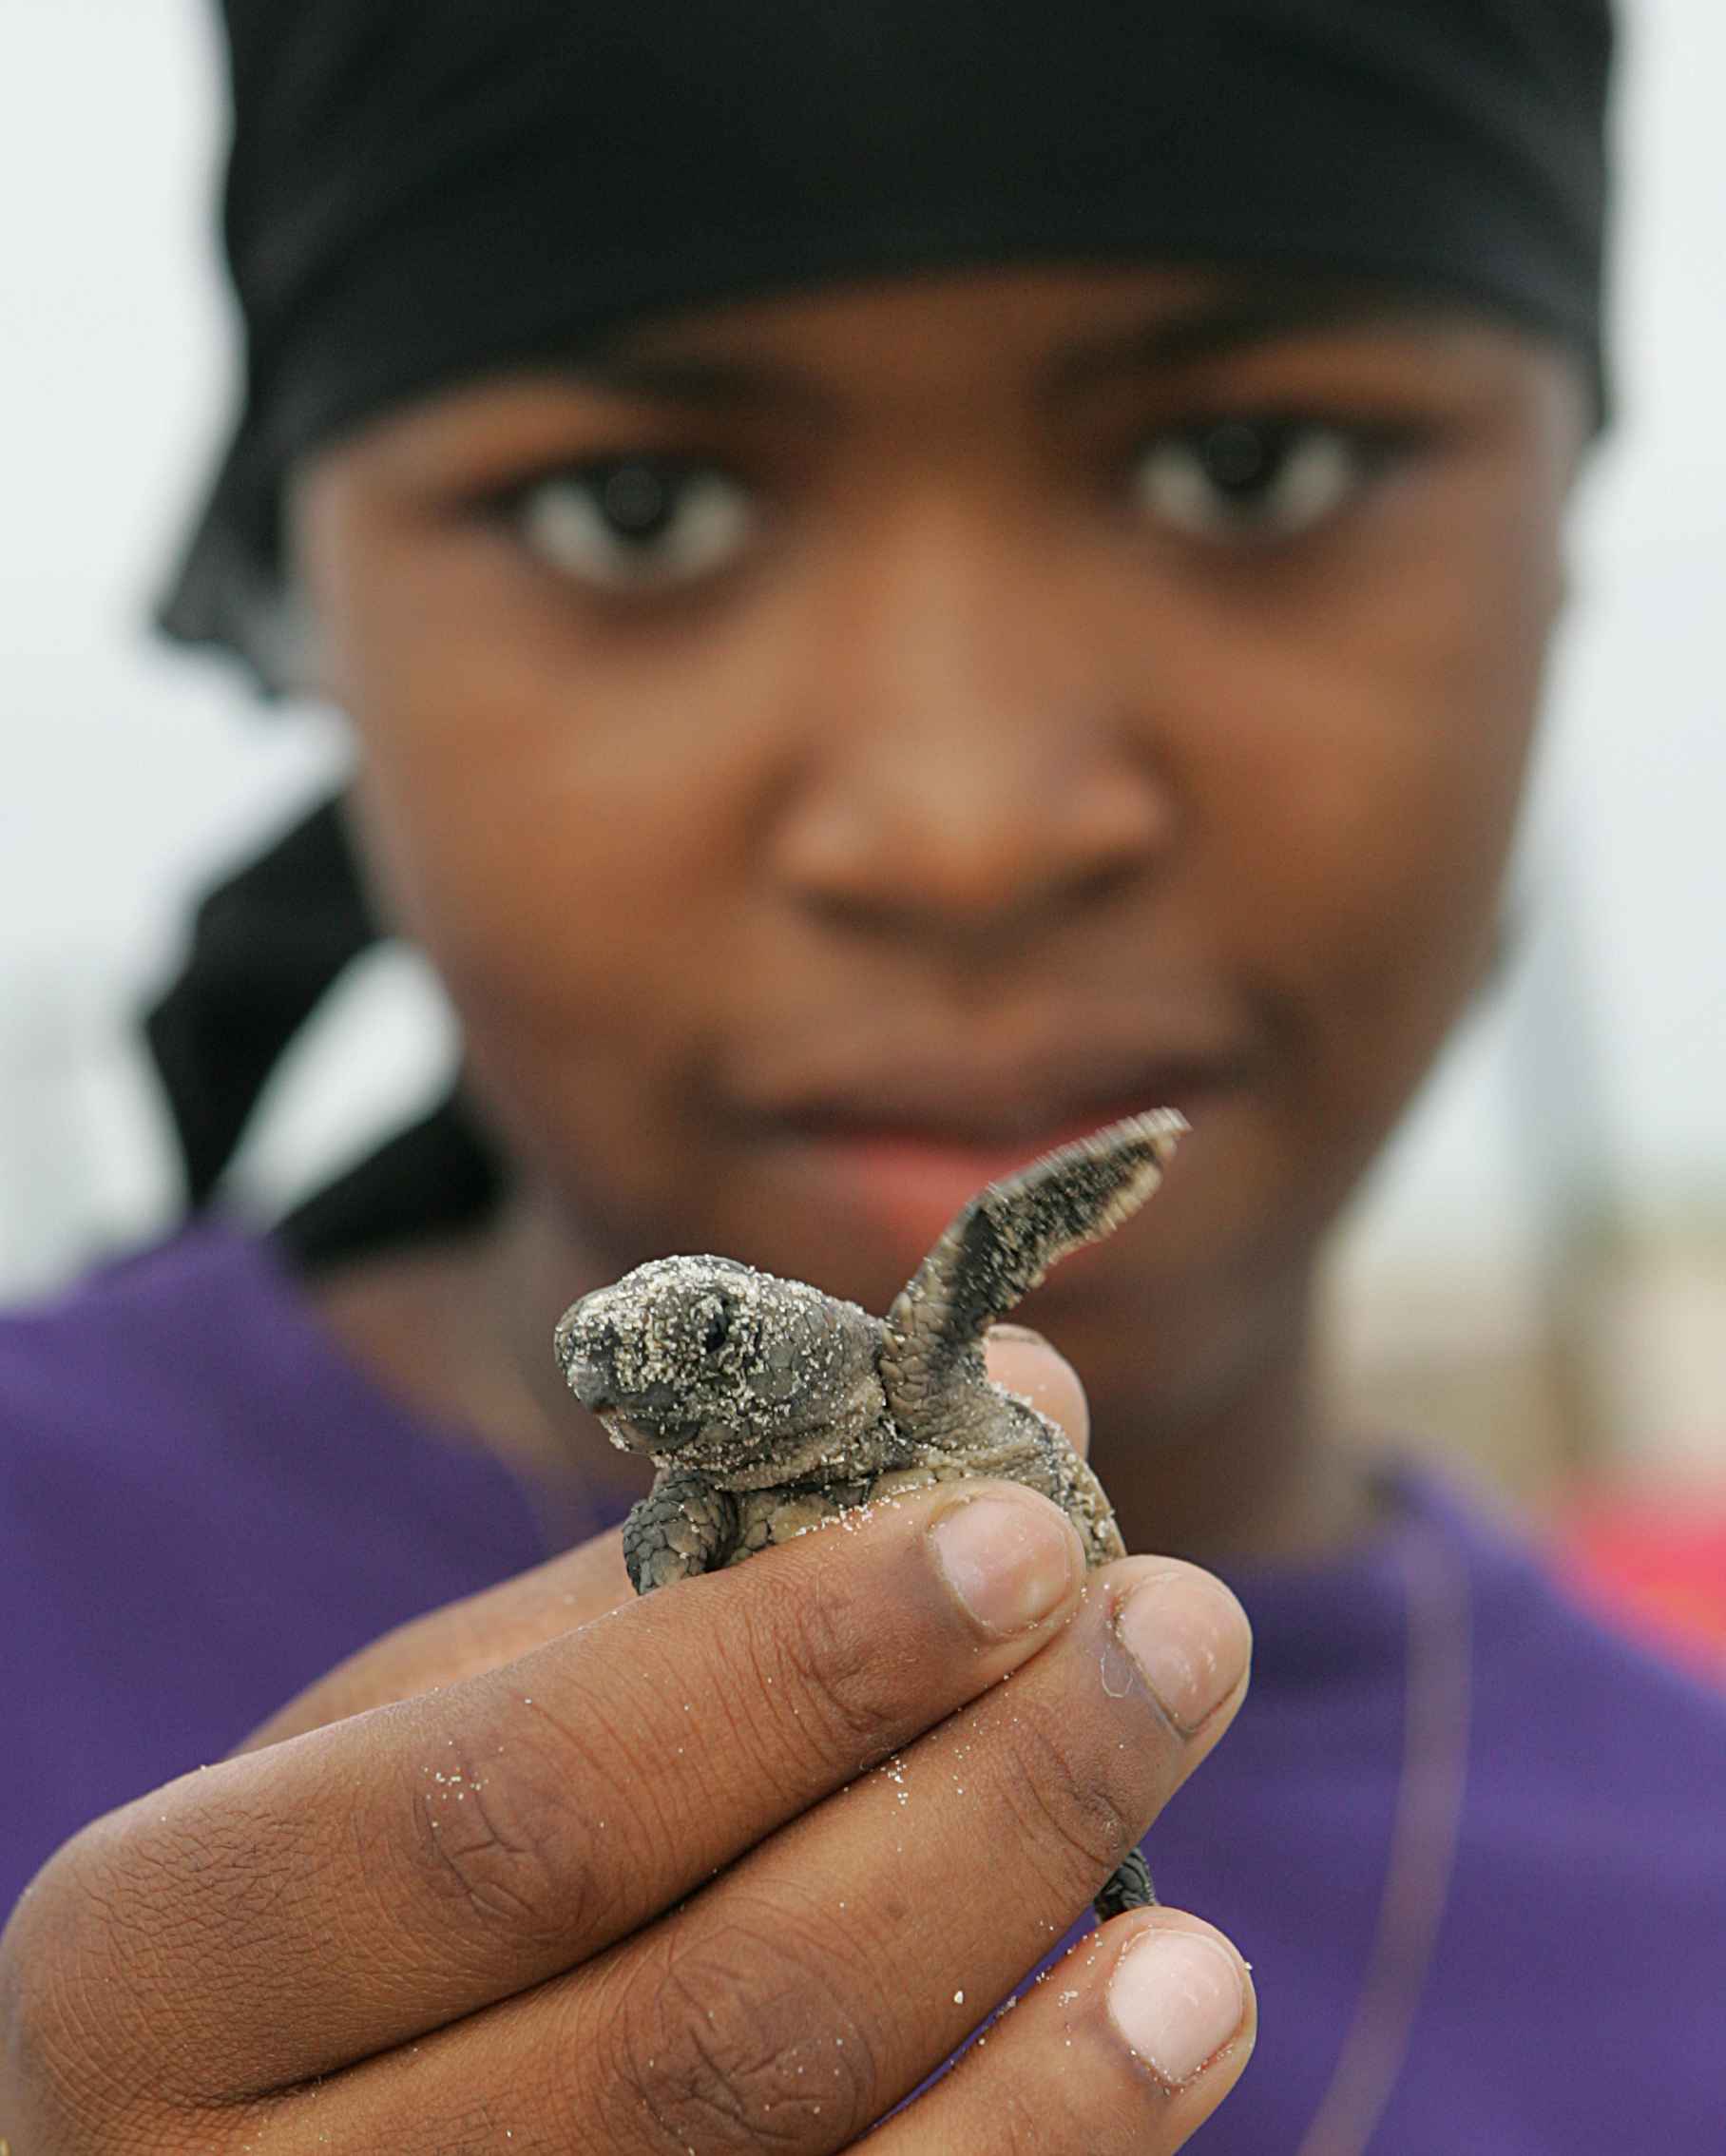 Afro american girl close up with baby loggerhead turtle